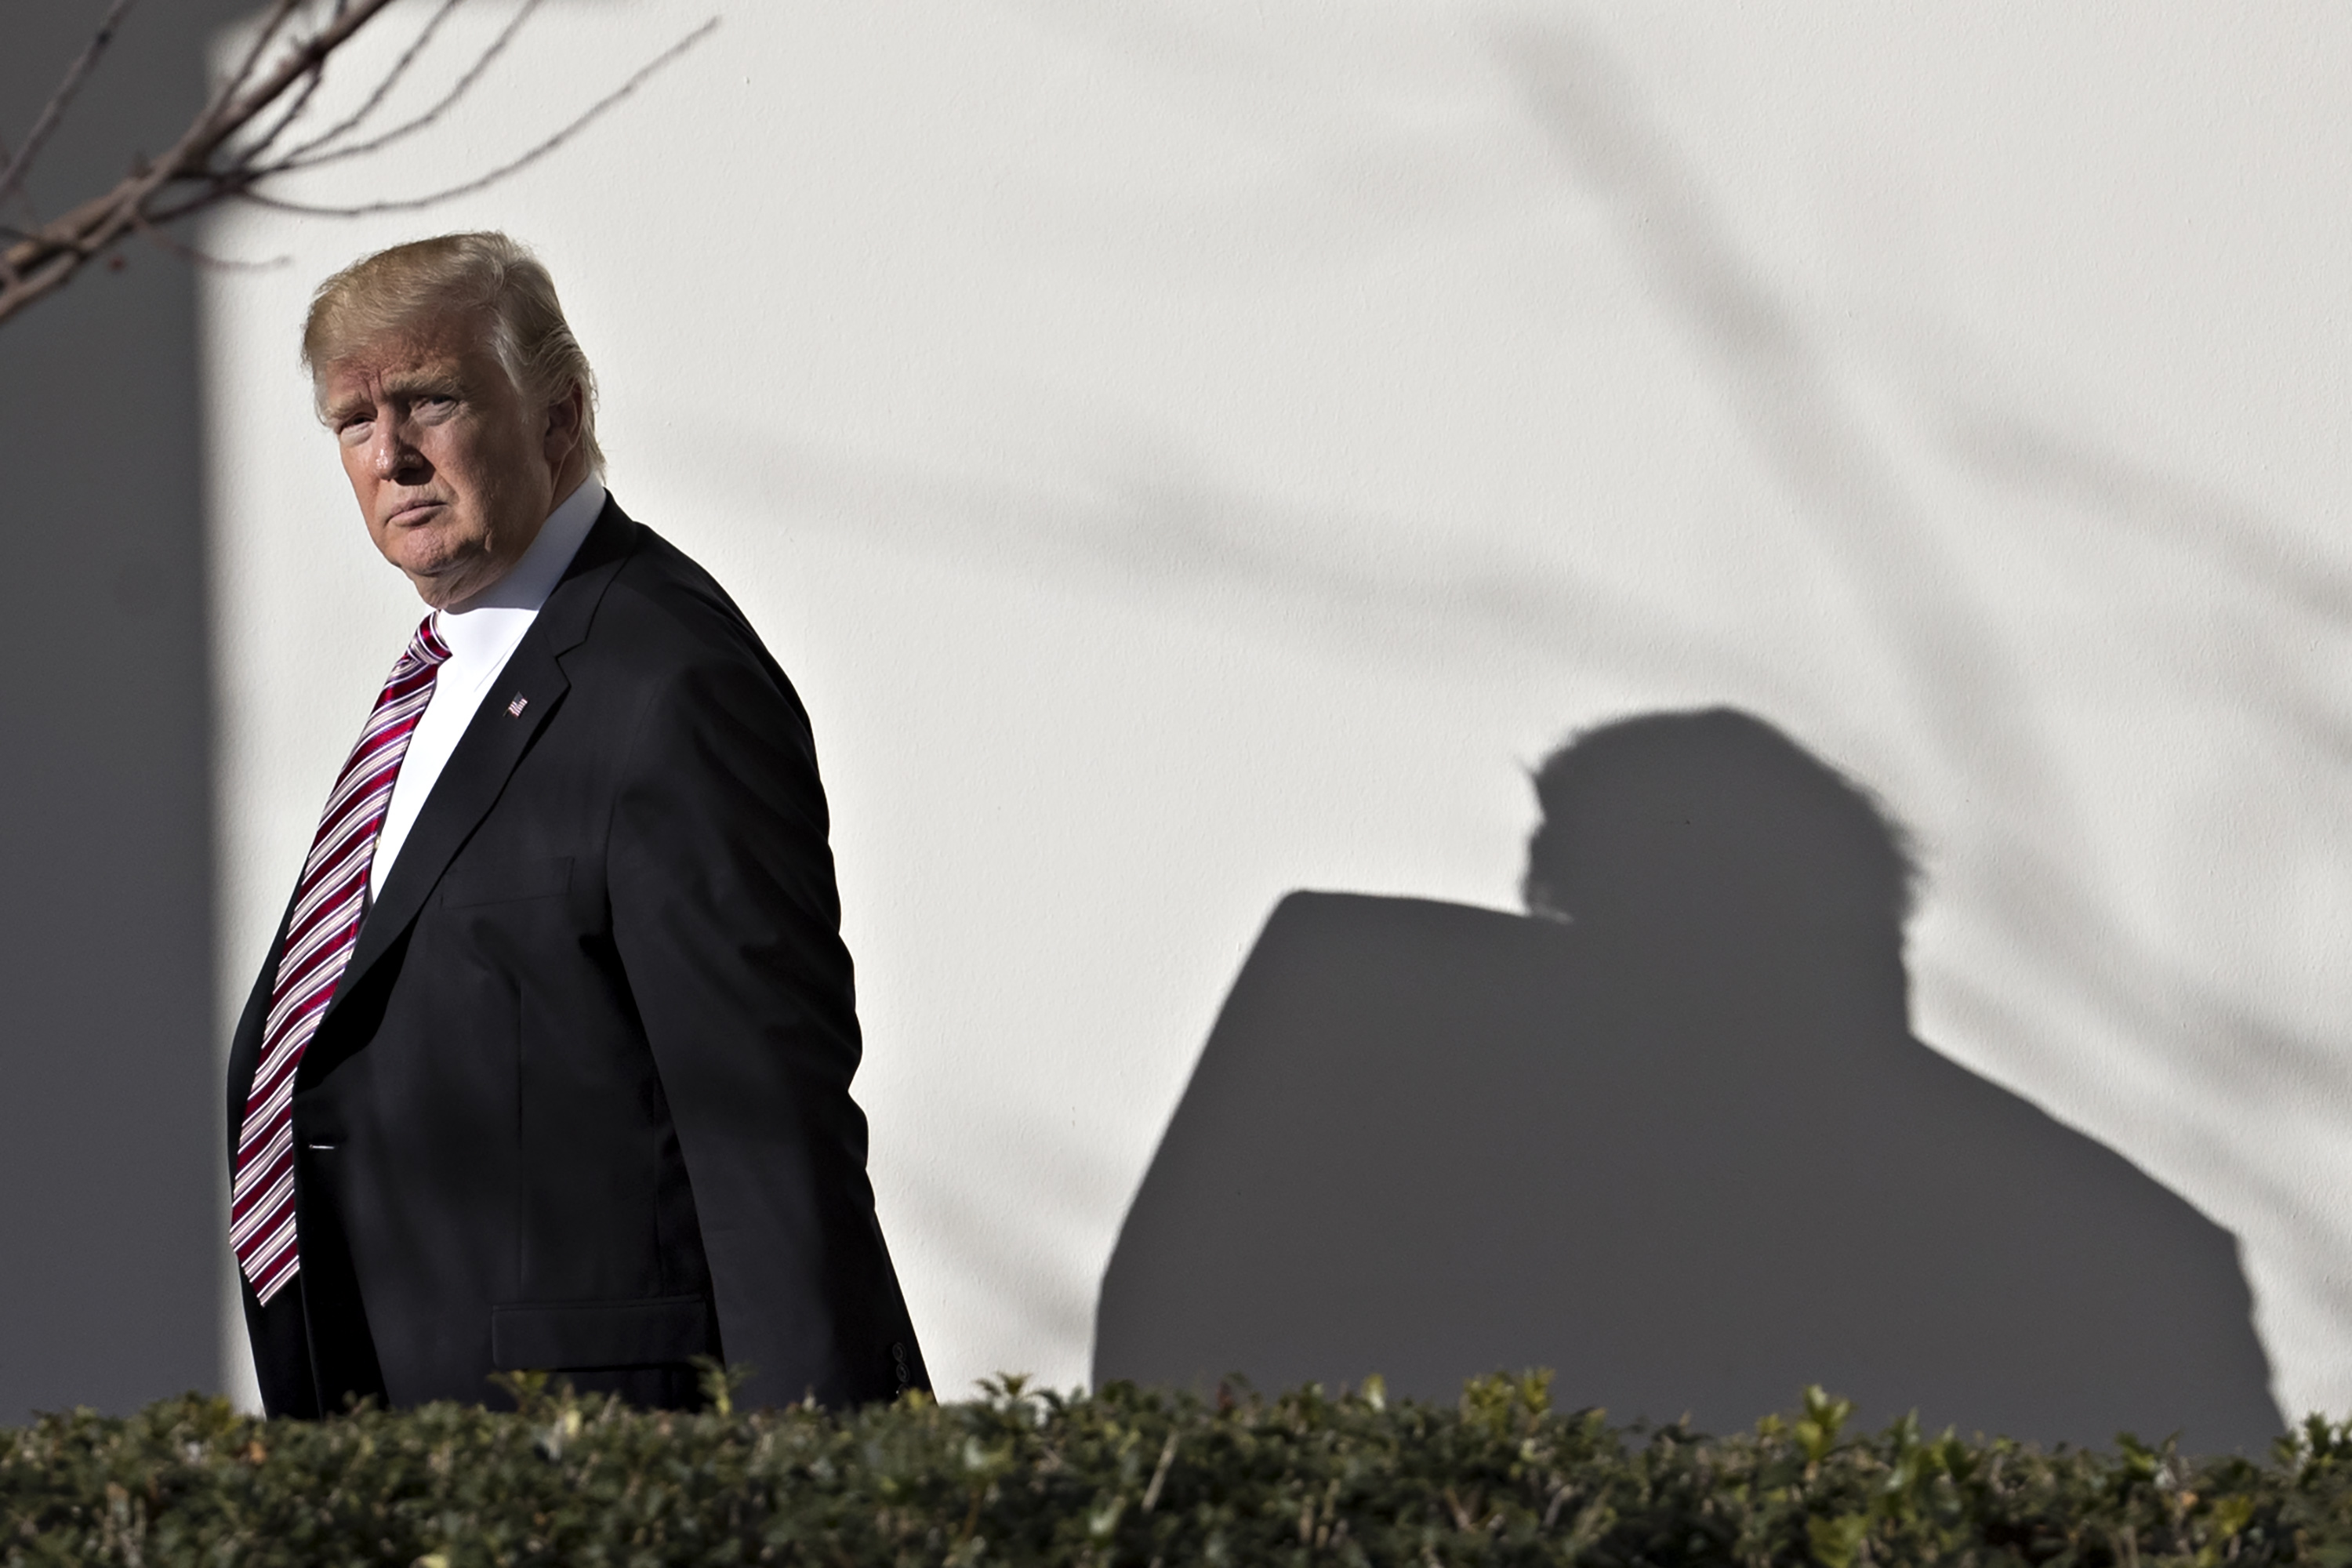 President Trump Arrives On The South Lawn Of The White House After Speaking At GOP Retreat